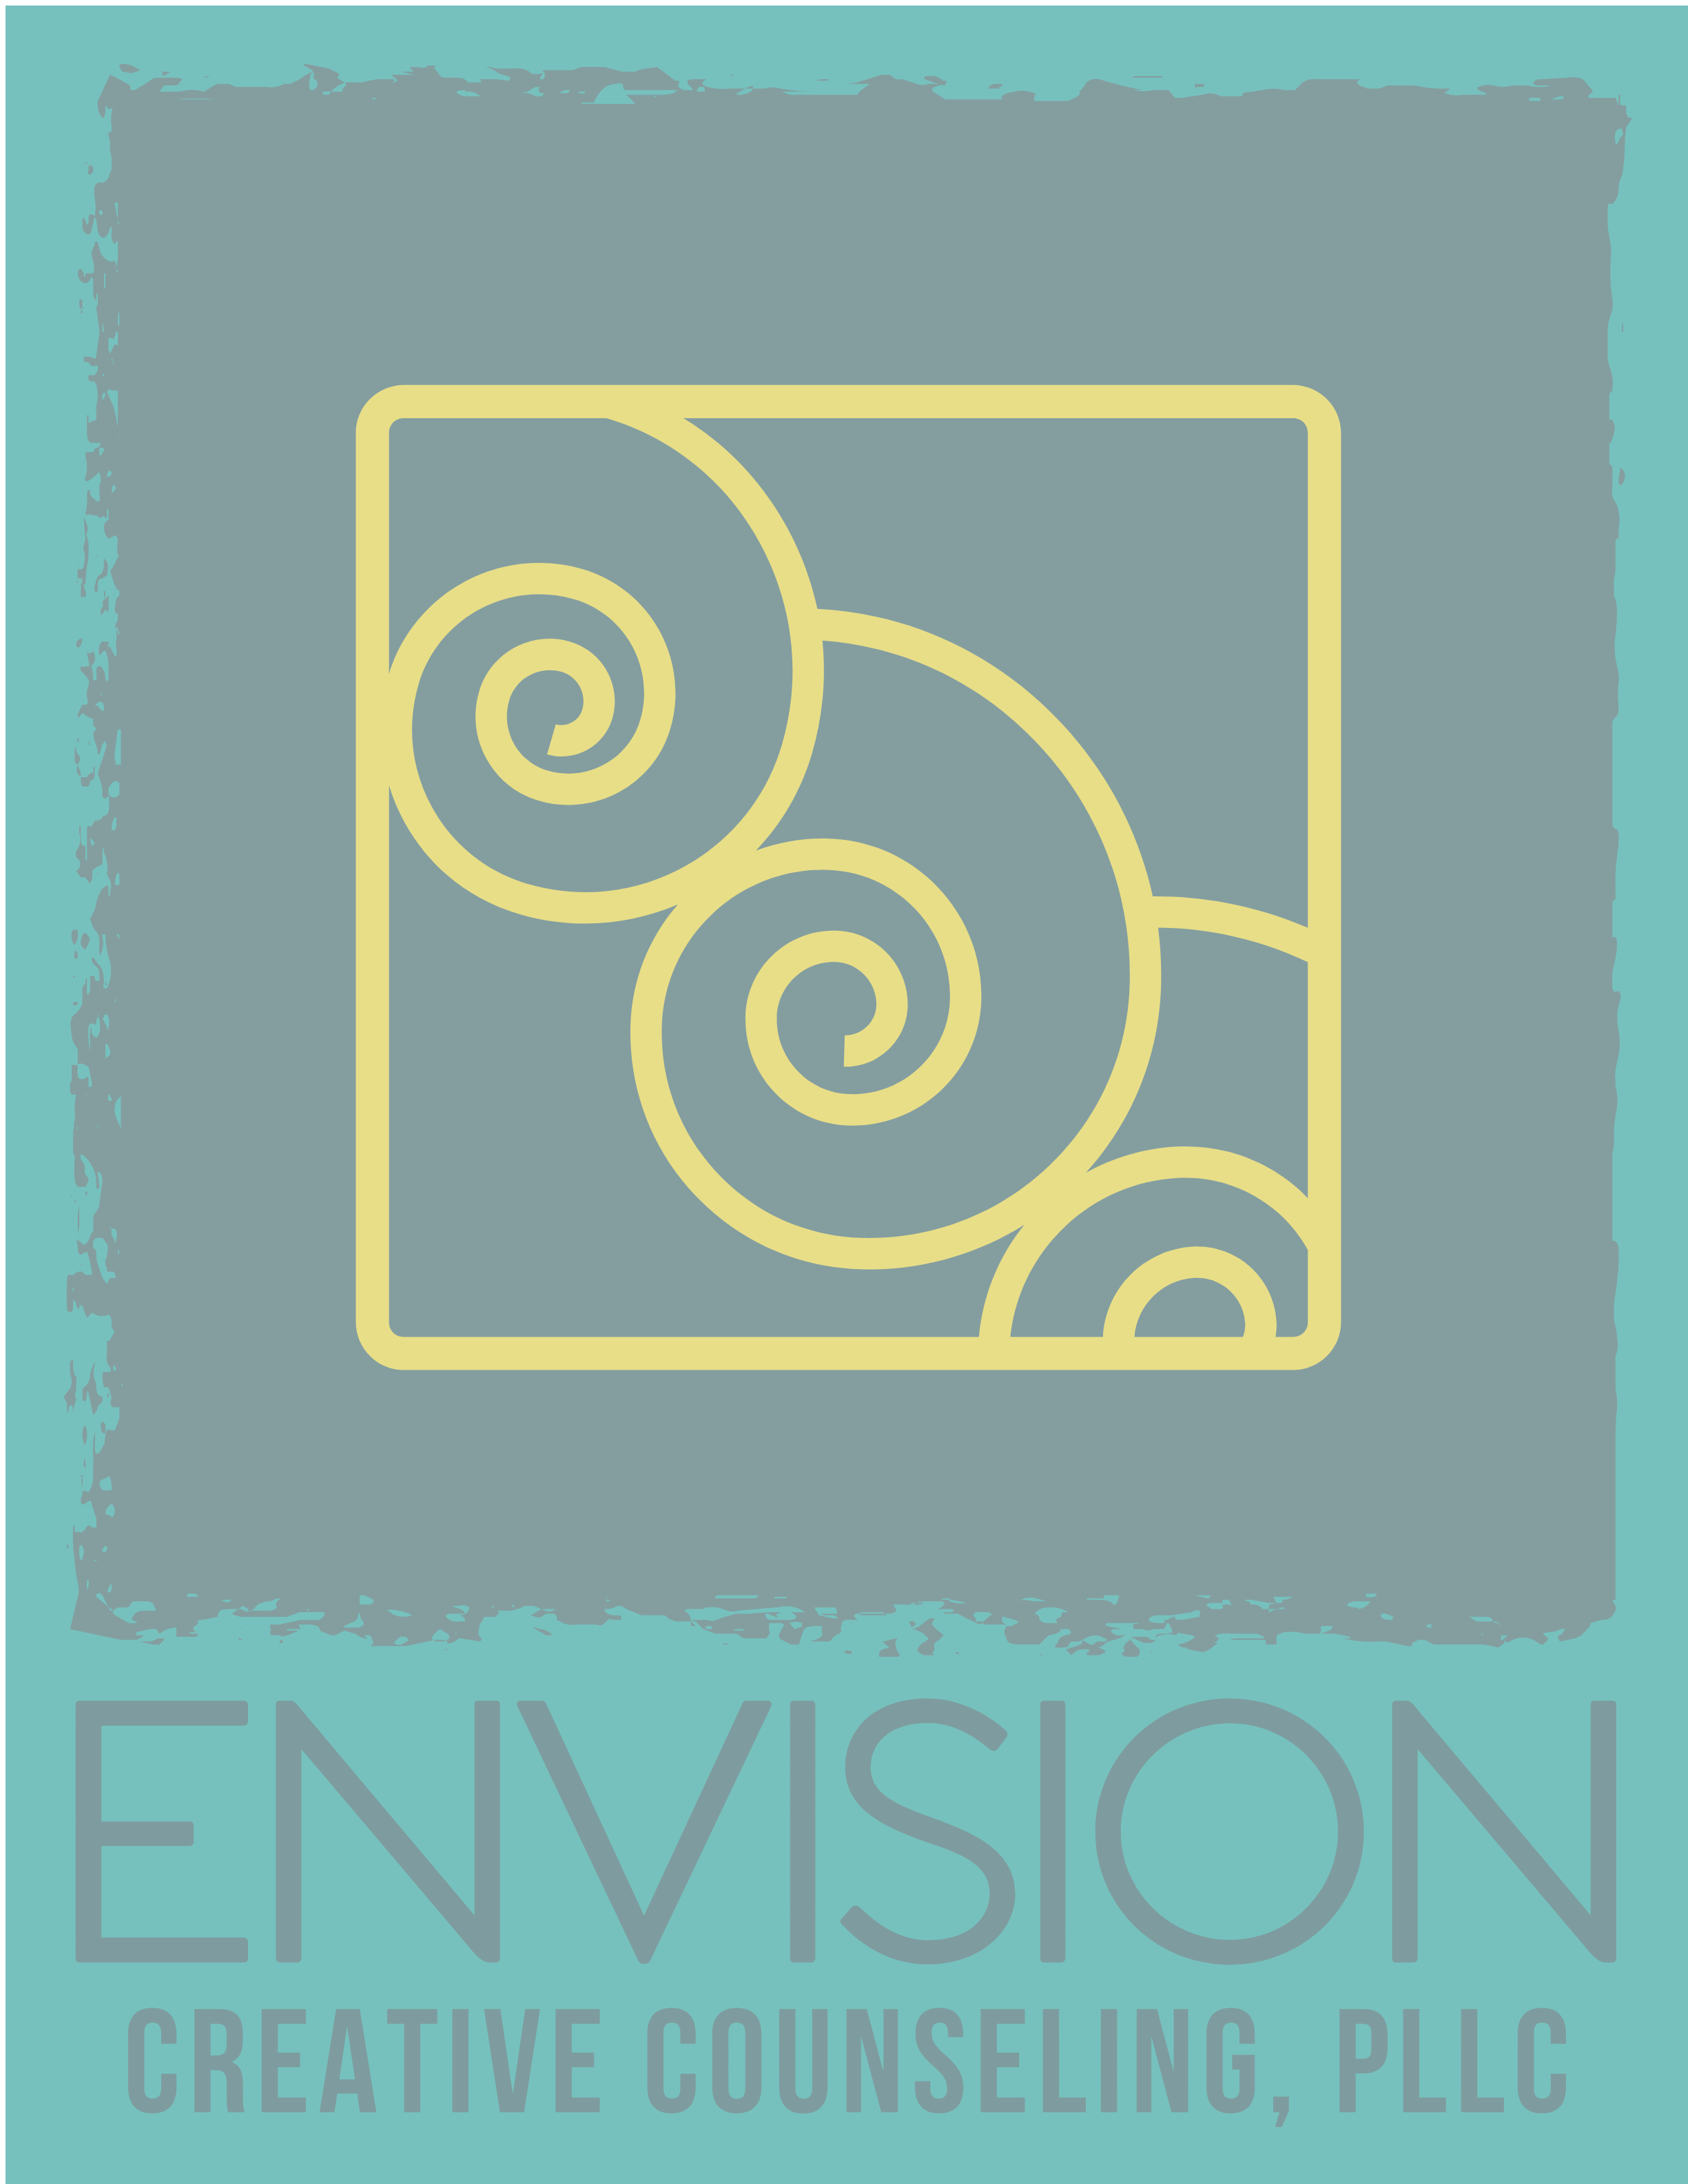 Envision Creative Counseling, PLLC